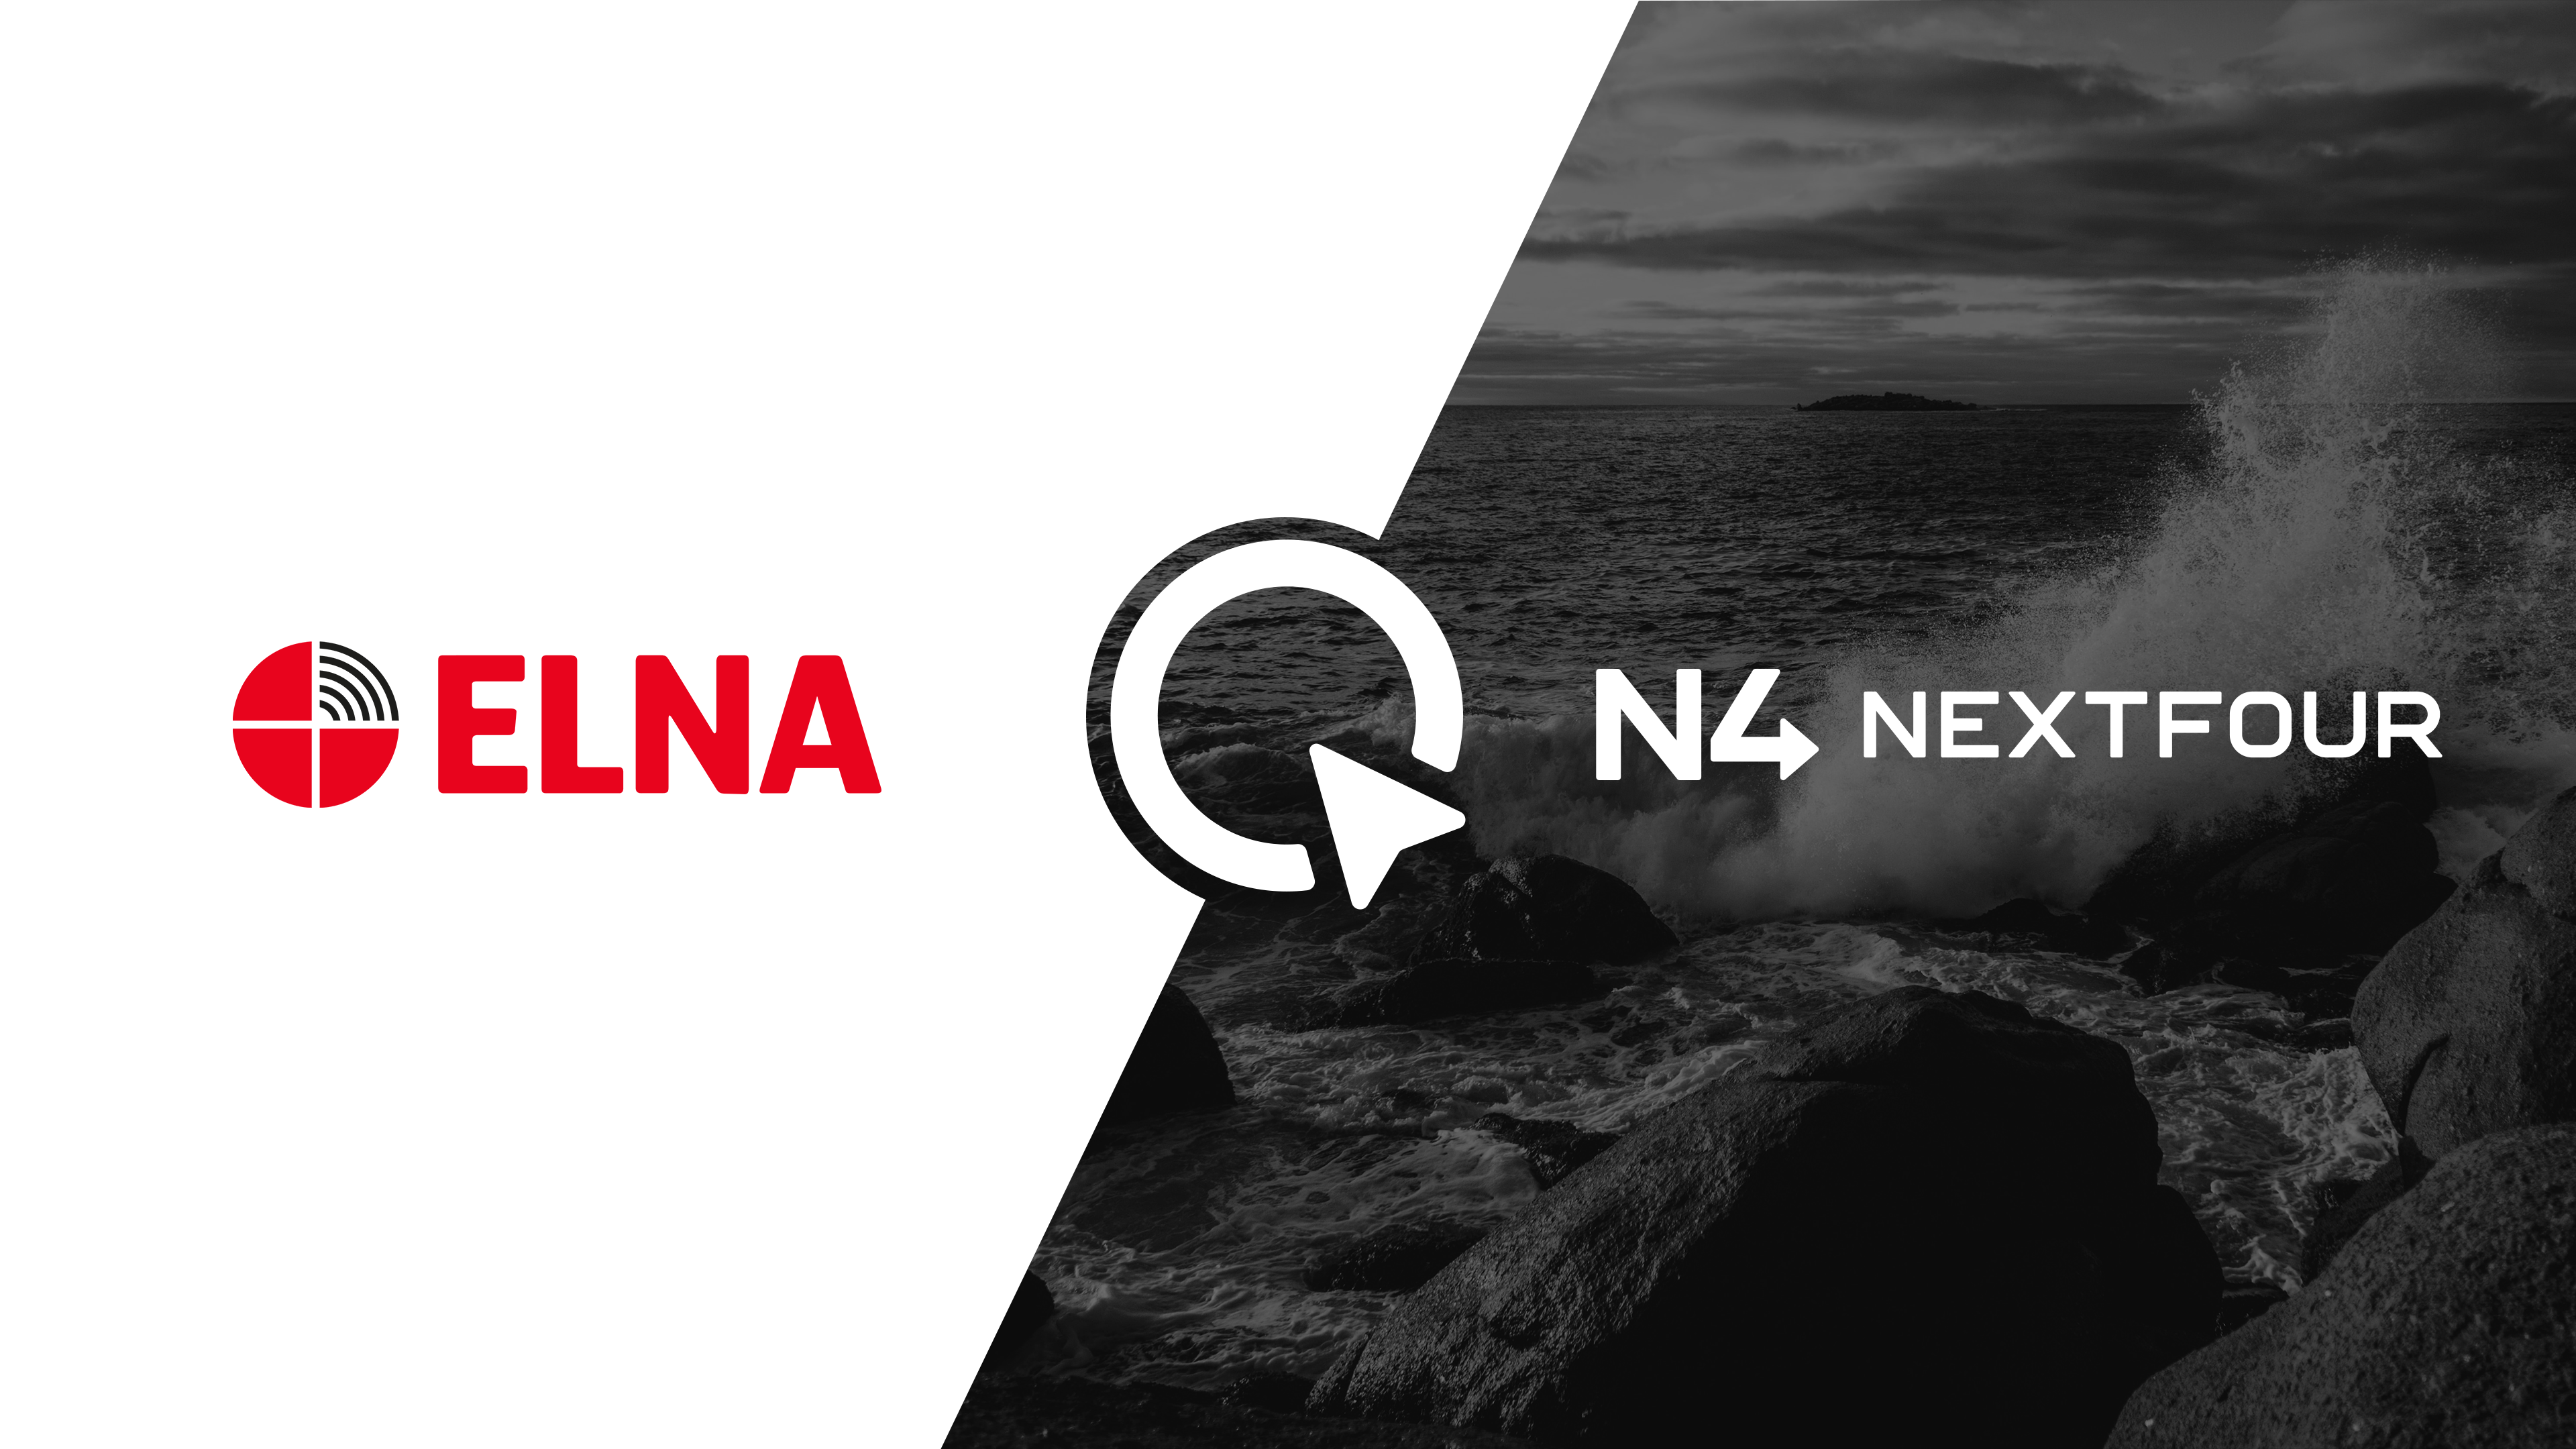 ELNA GmbH and Q Experience by Nextfour Solutions Ltd announces a Distribution agreement for Germany for 2023 onwards.